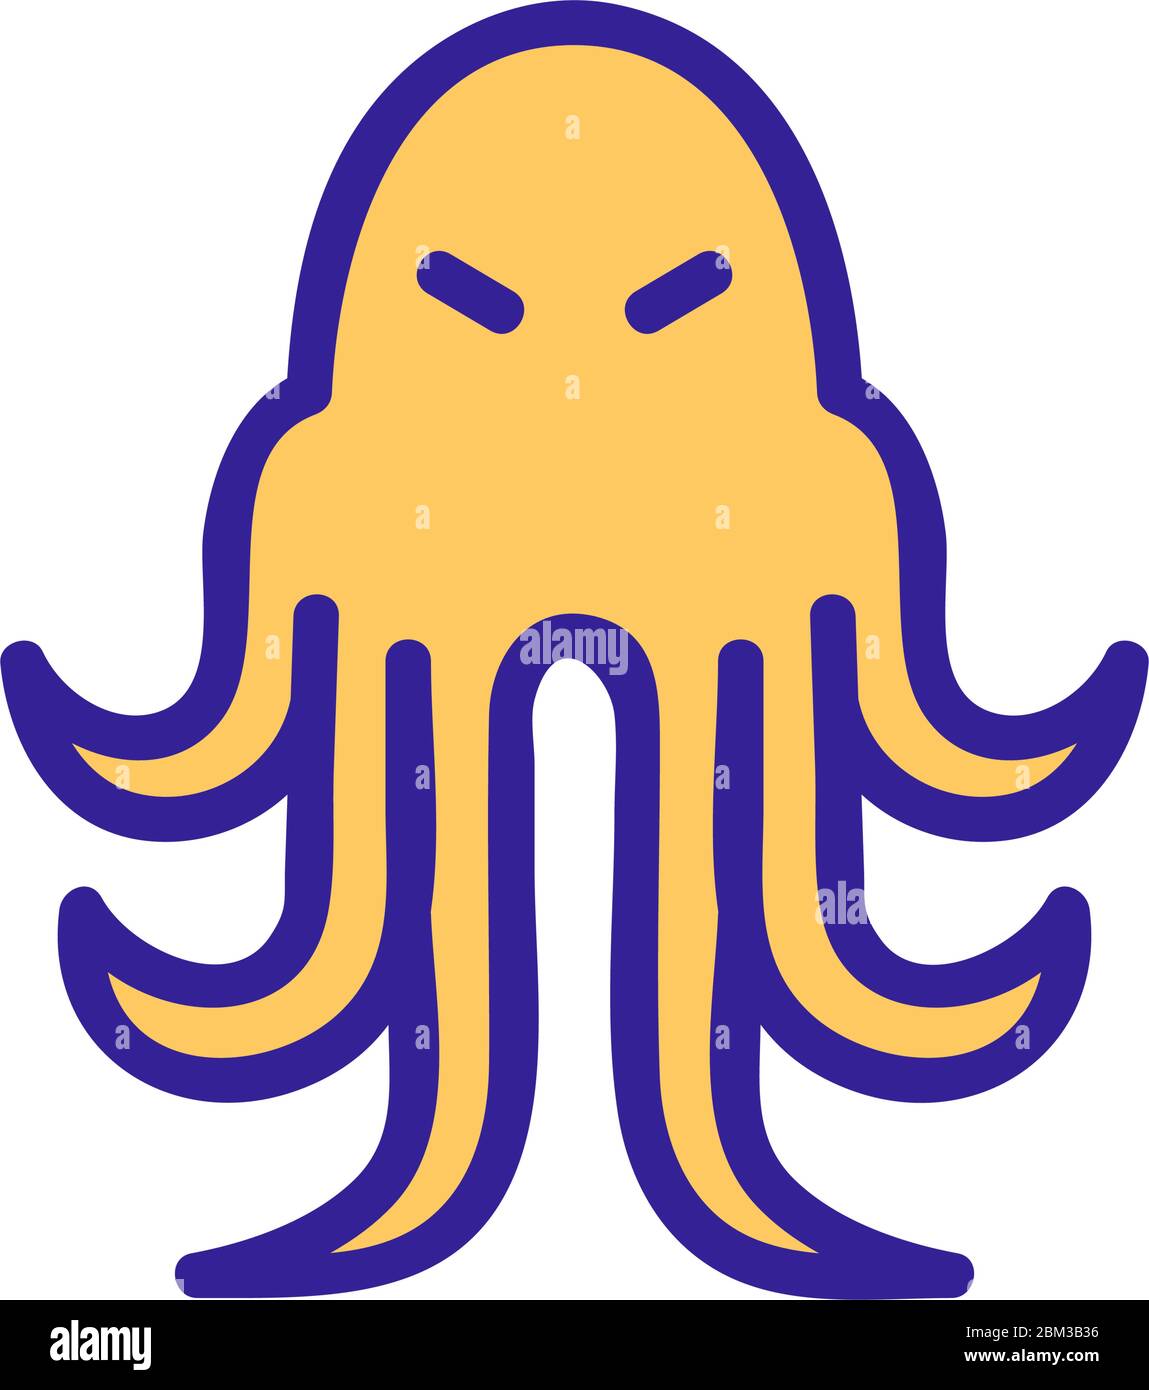 https://c8.alamy.com/comp/2BM3B36/angry-squid-with-long-tentacles-icon-vector-outline-illustration-2BM3B36.jpg